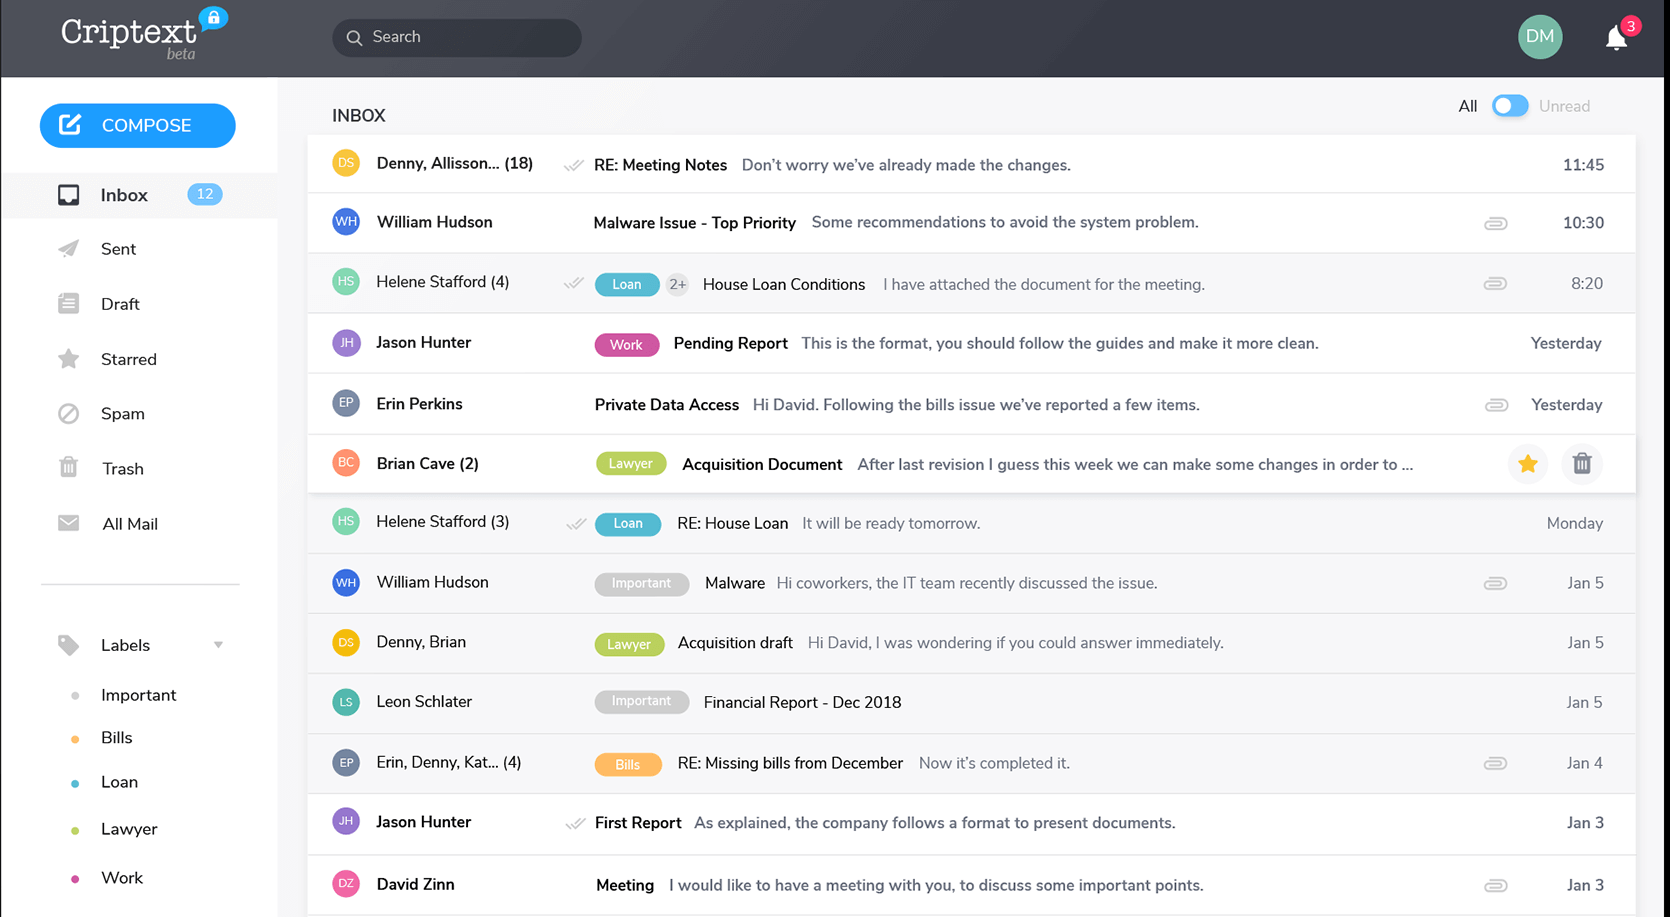 Criptext - secure email built on privacy